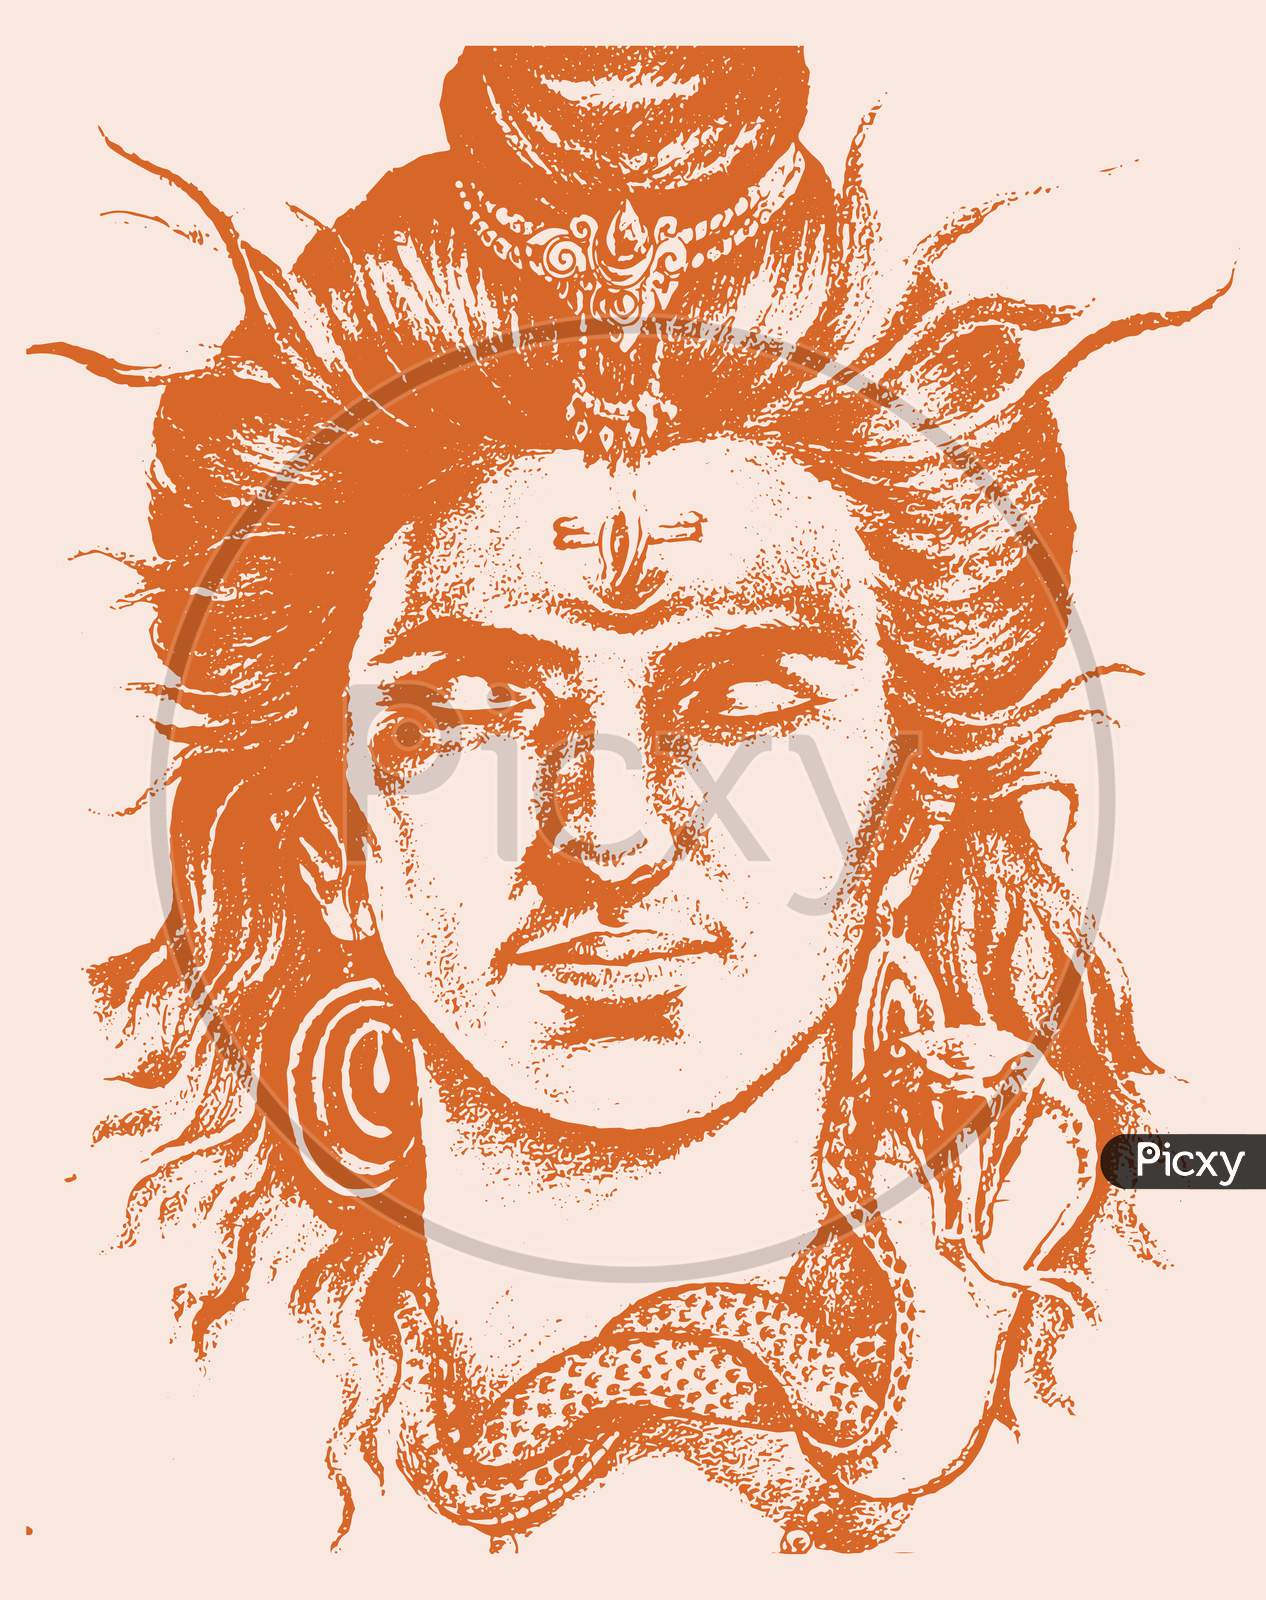 lord shiva angry face sketch